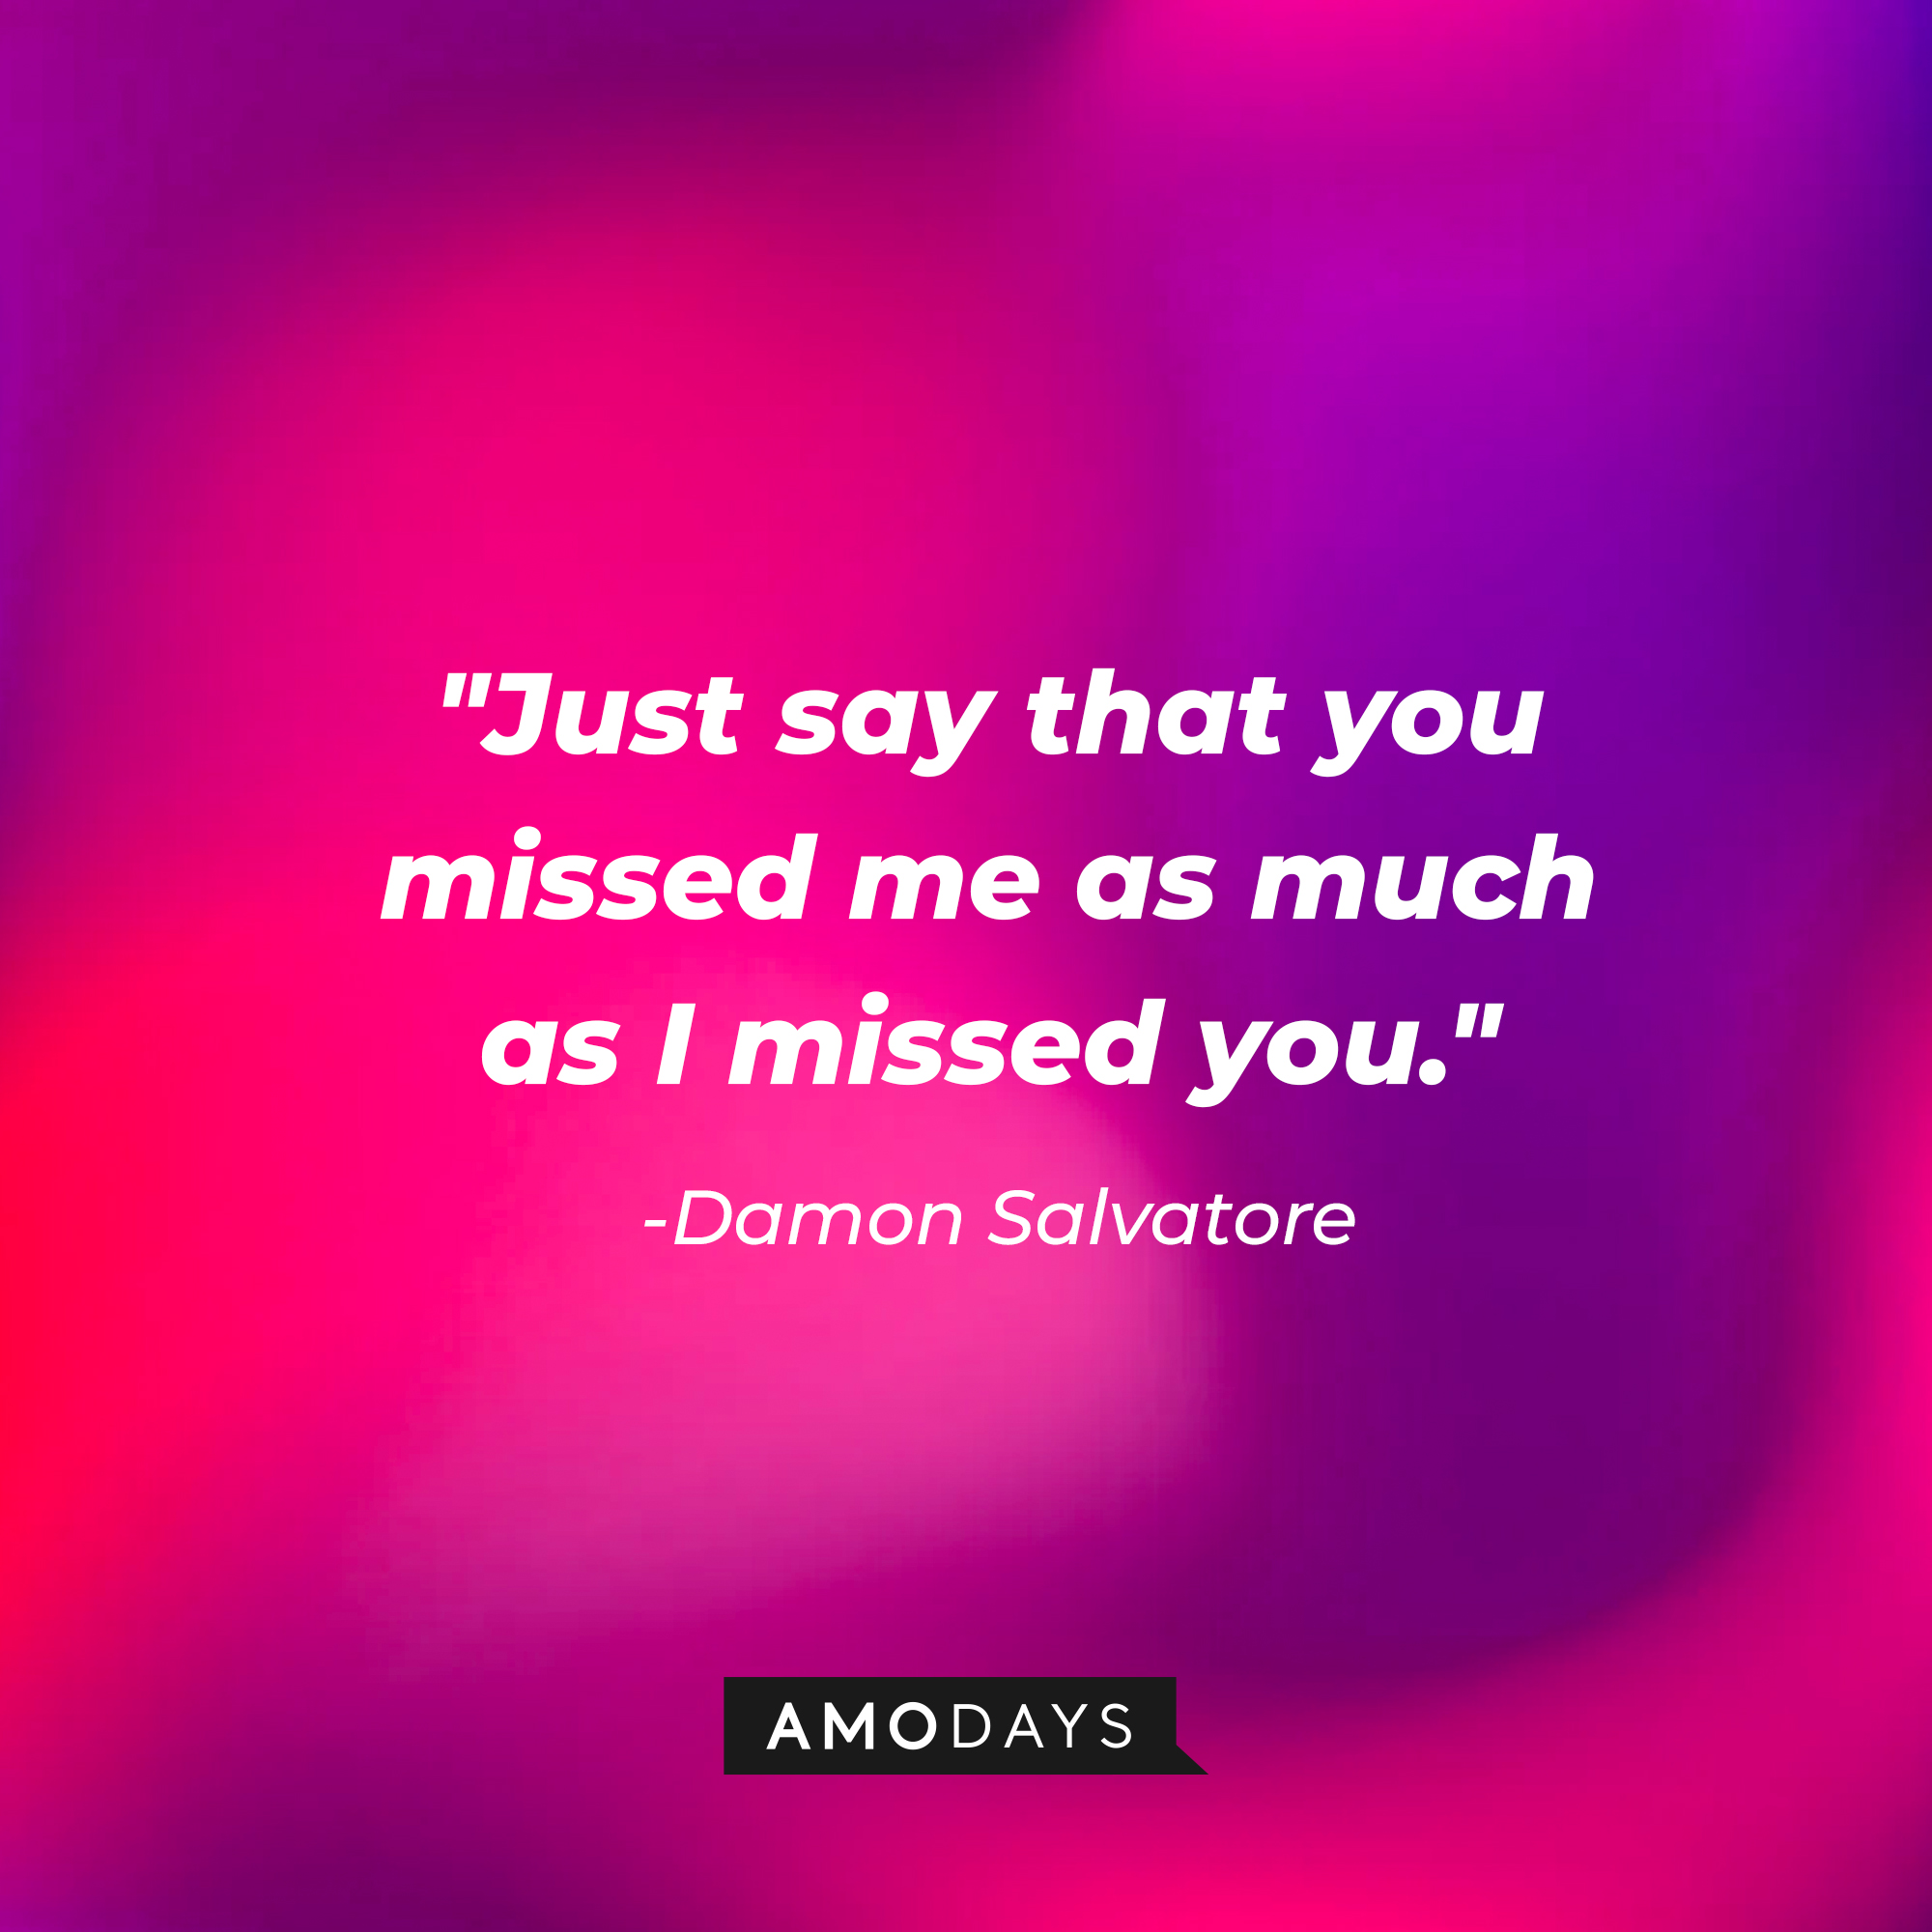 Damon Salvatore's quote: "Just say that you missed me as much as I missed you." | Source: AmoDays